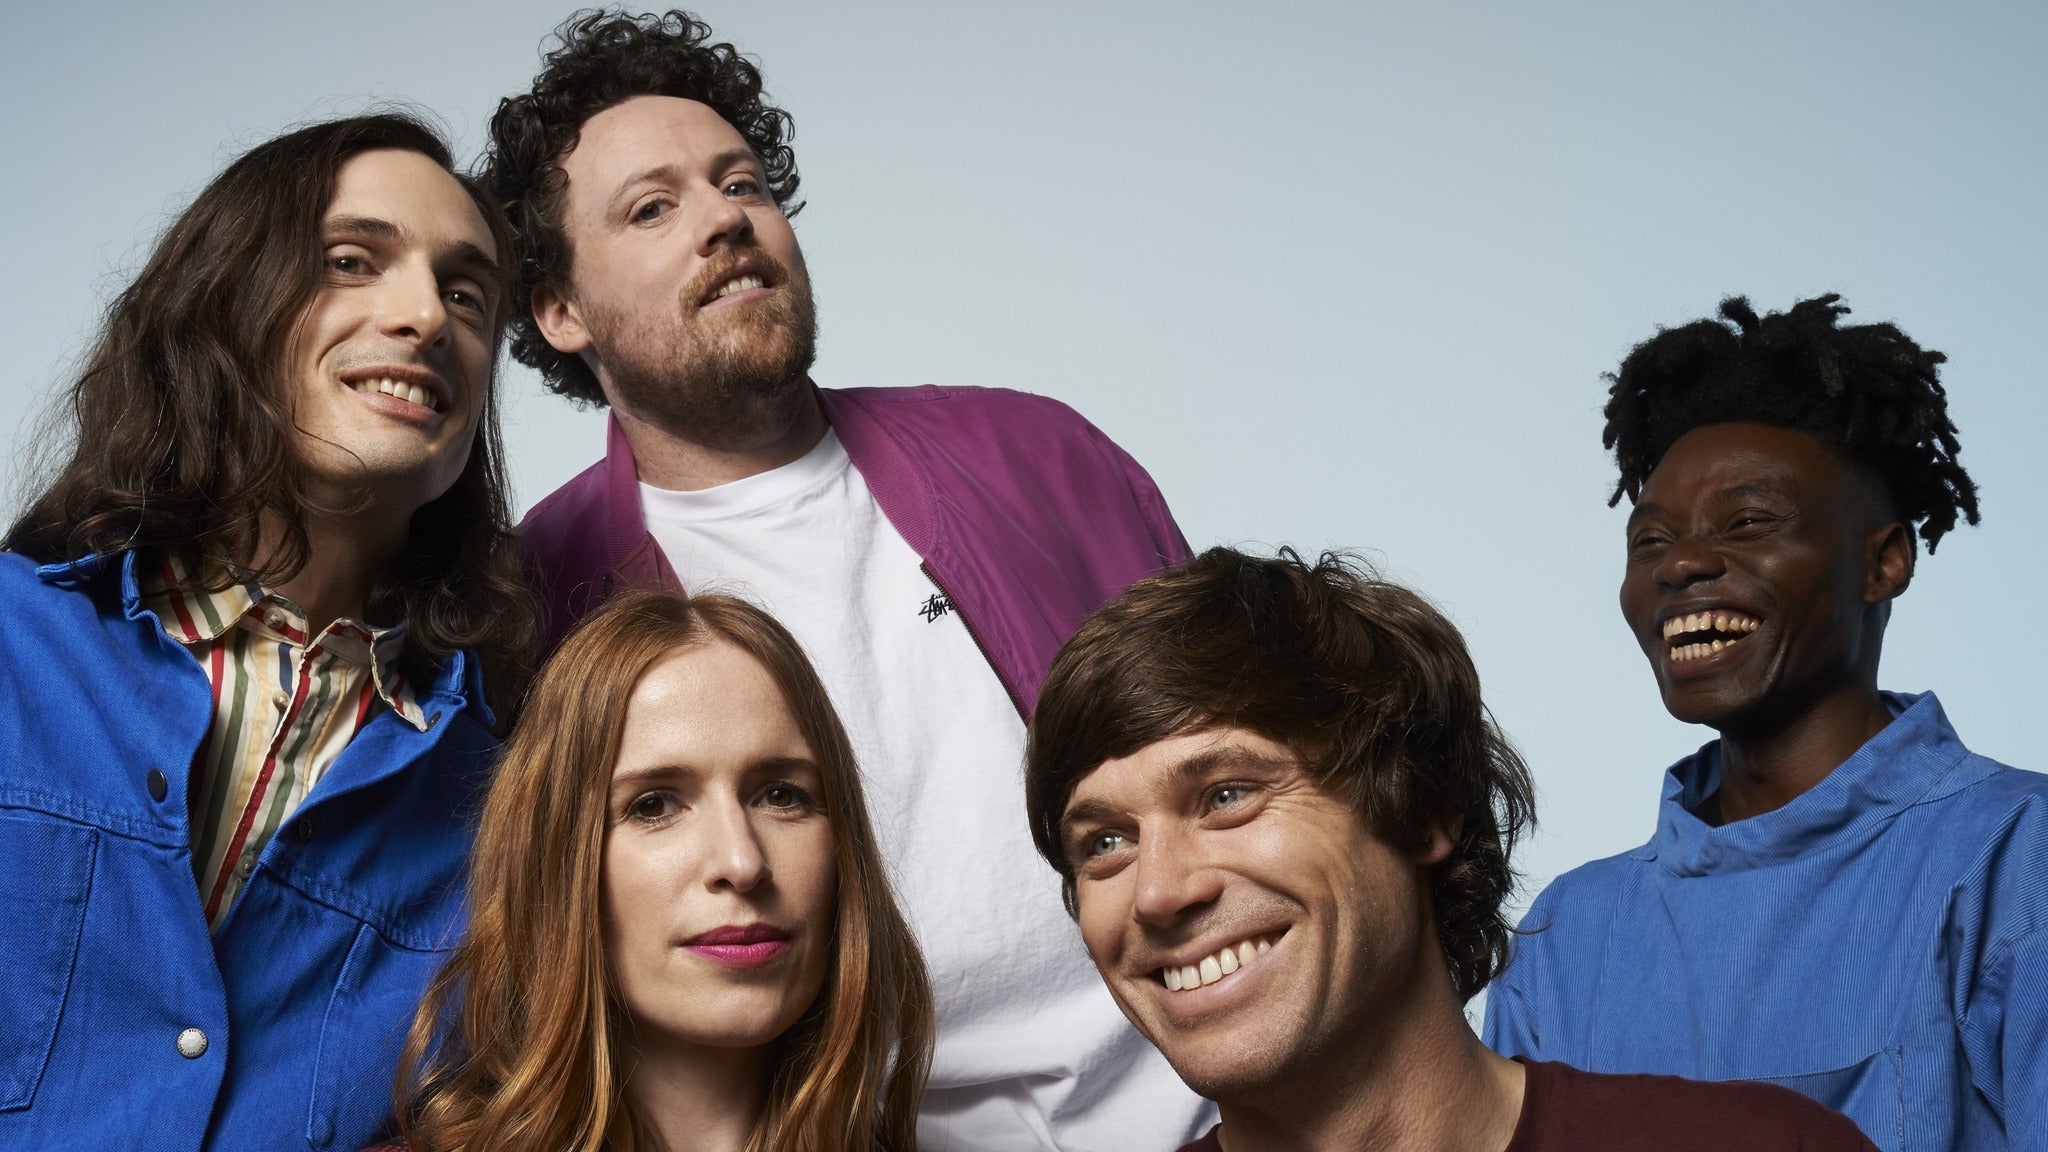 Image used with permission from Ticketmaster | Metronomy tickets